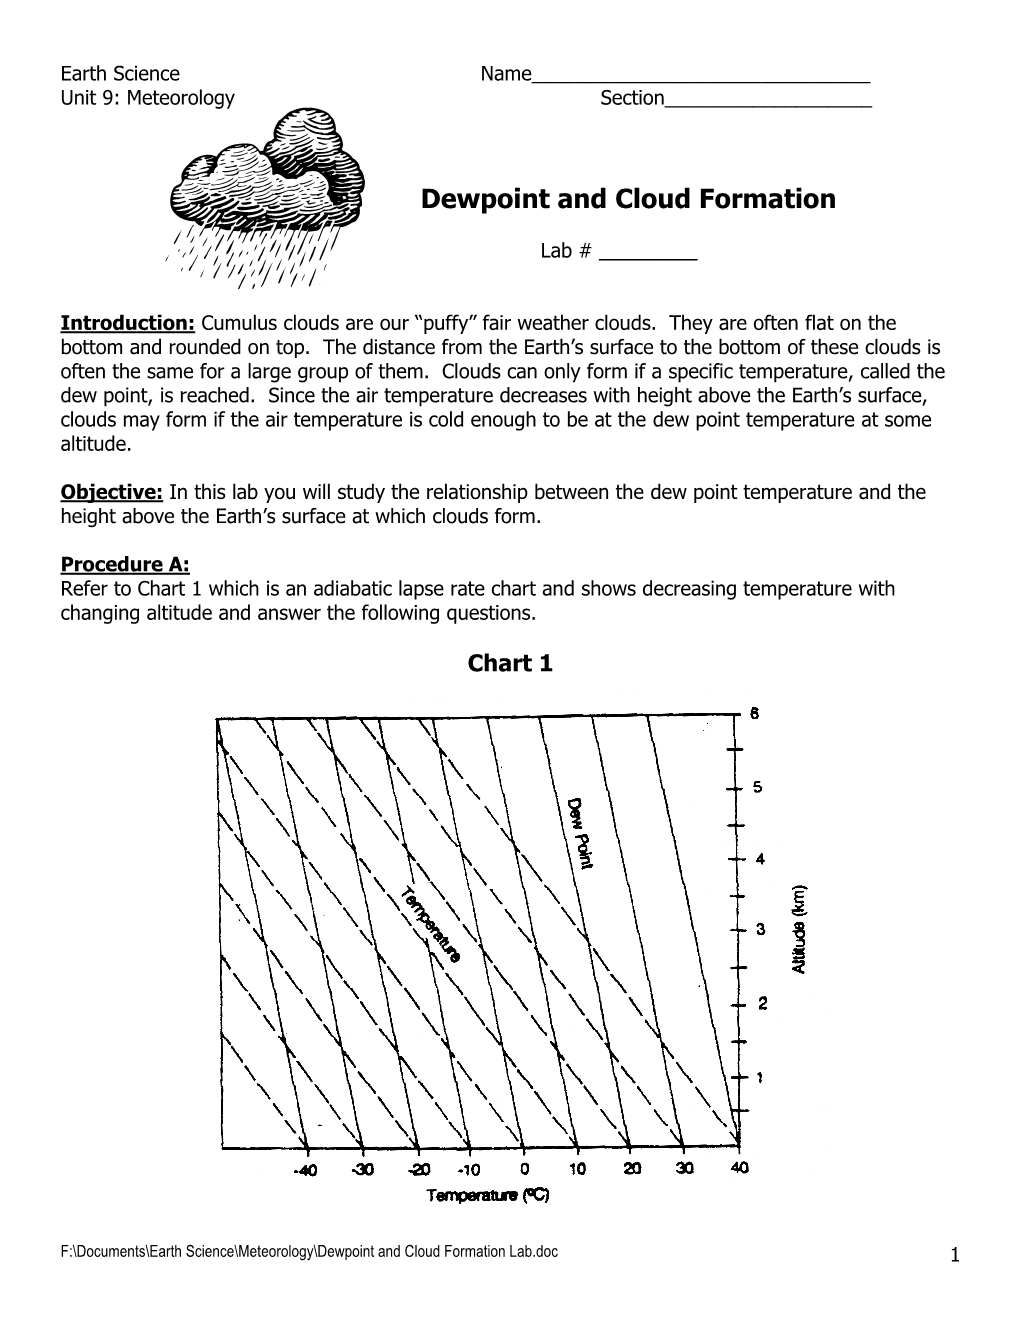 Dewpoint and Cloud Formation